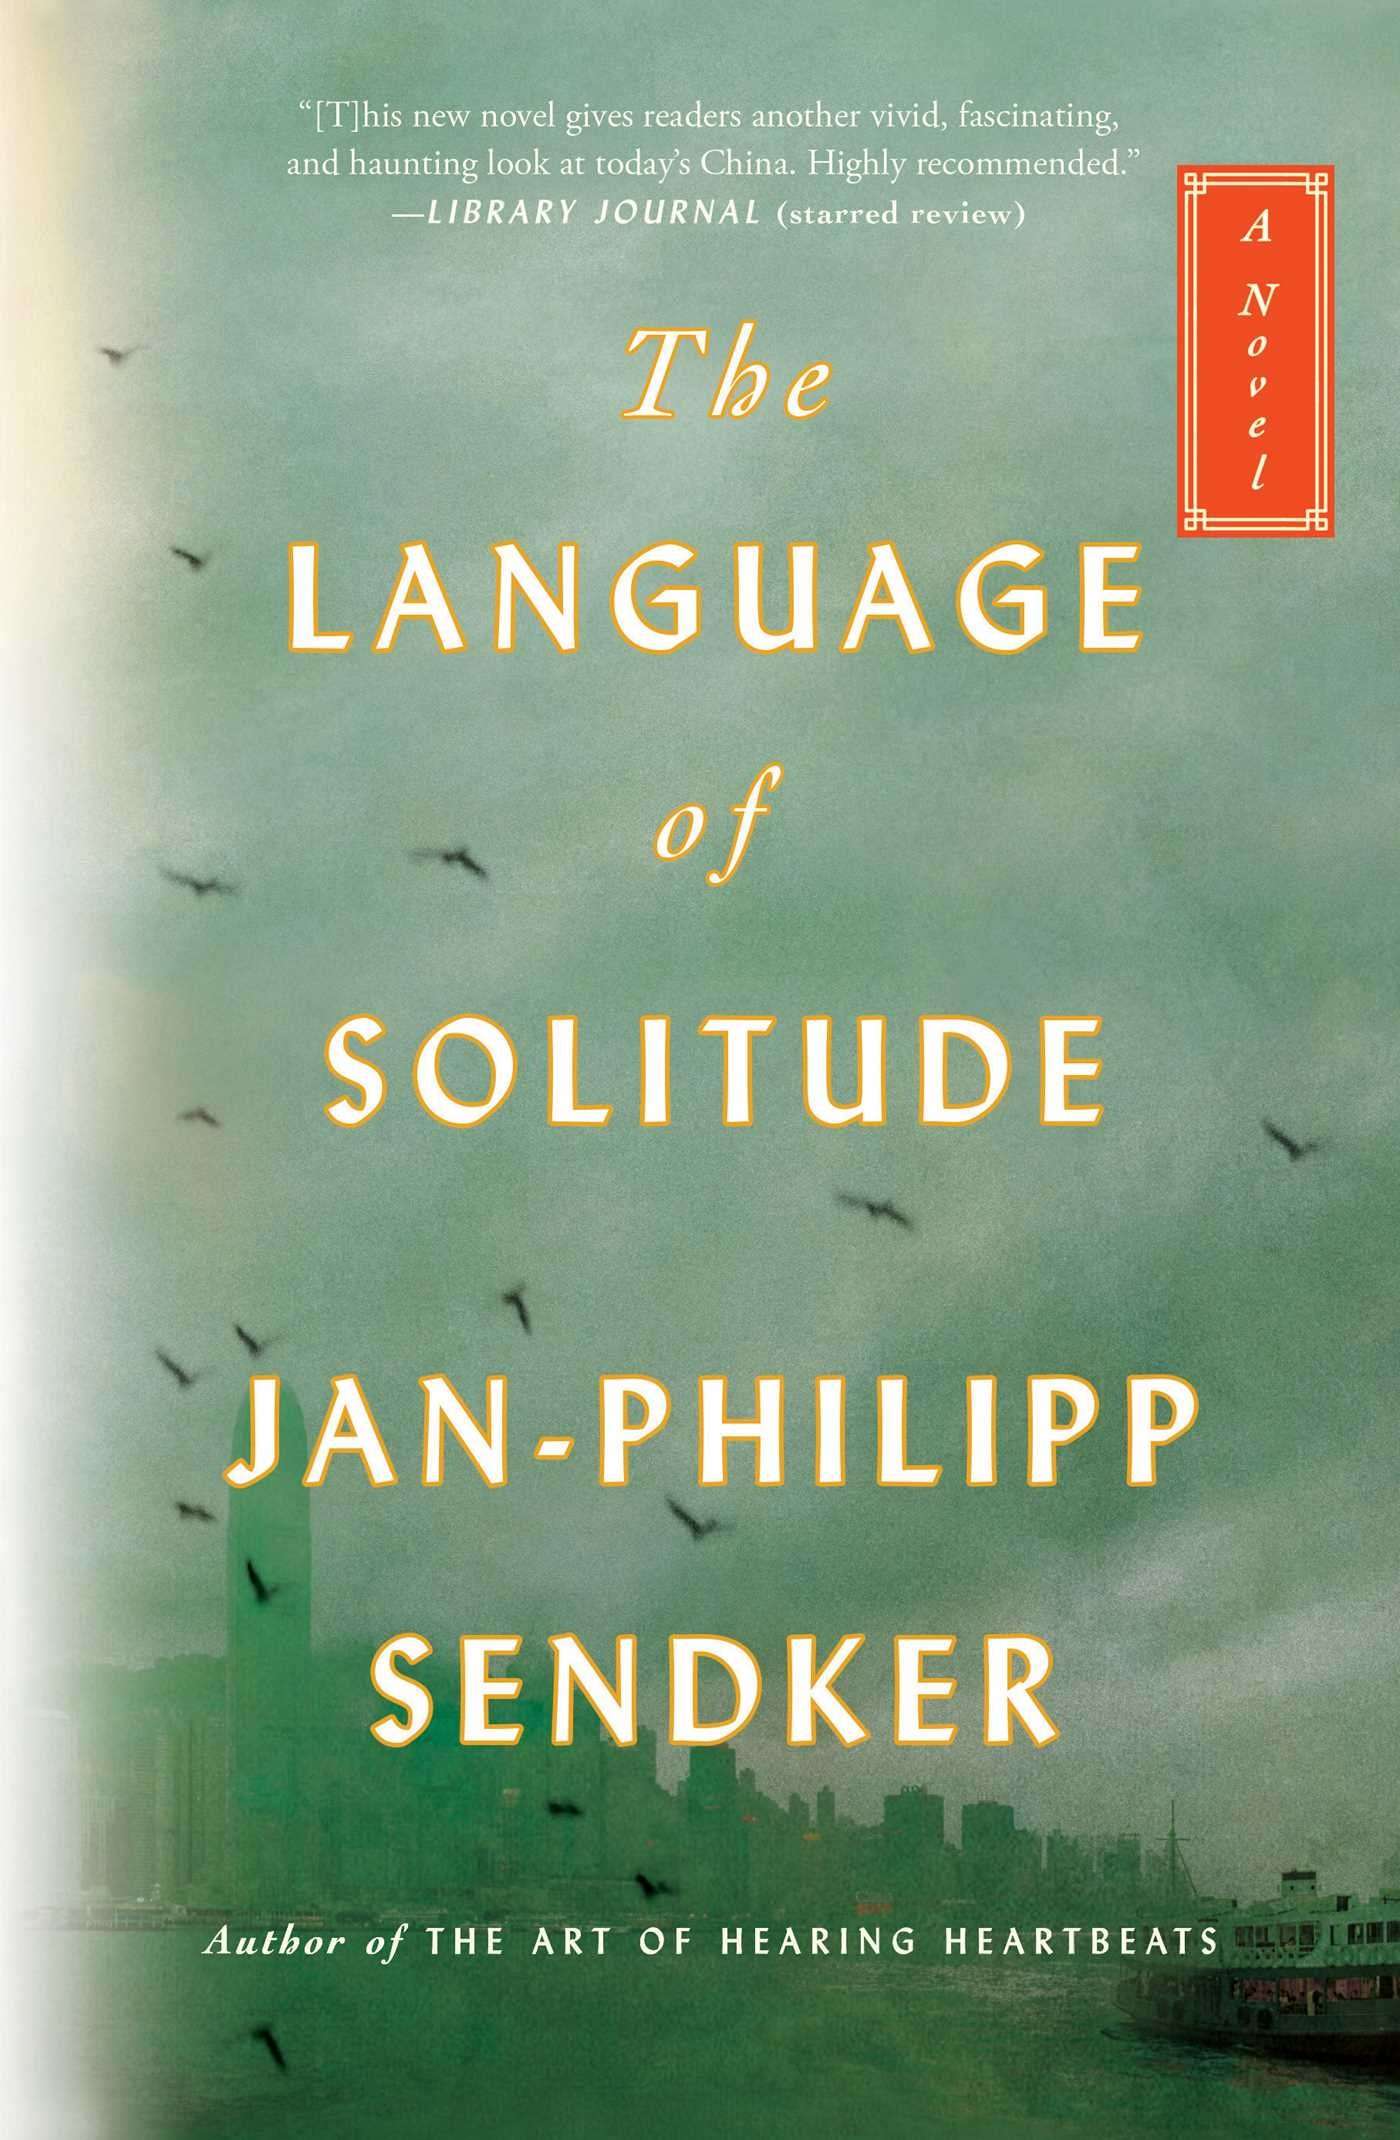 With its well-drawn Hong Kong and China locations and its unobtrusive symbolism, German writer’s book The Language of Solitude addresses unspoken depths in contemporary Chinese society